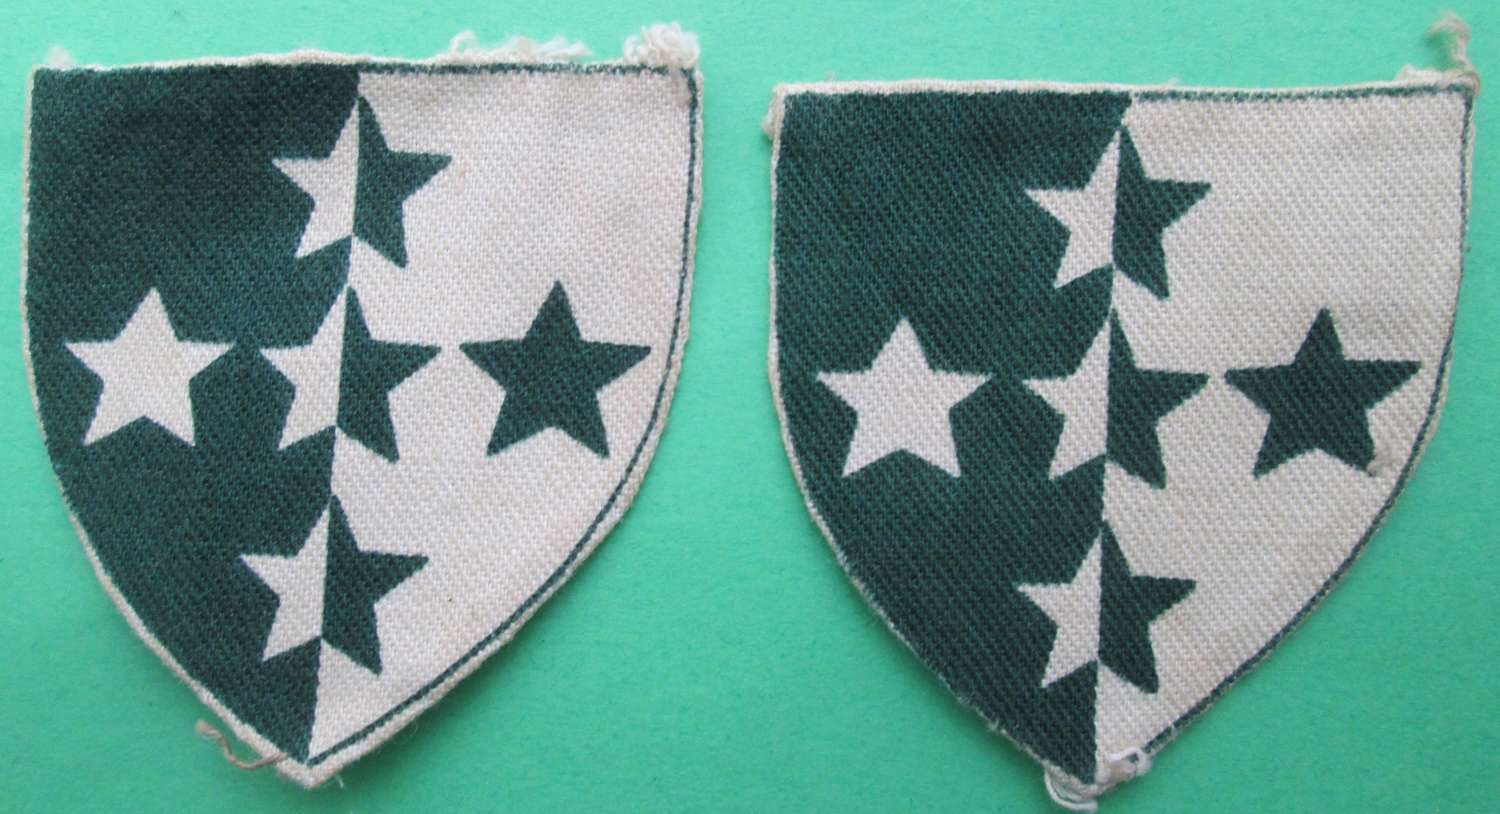 A PAIR OF SOUTHERN COMMAND ROYAL ARMY DENTAL CORPS PATCHES